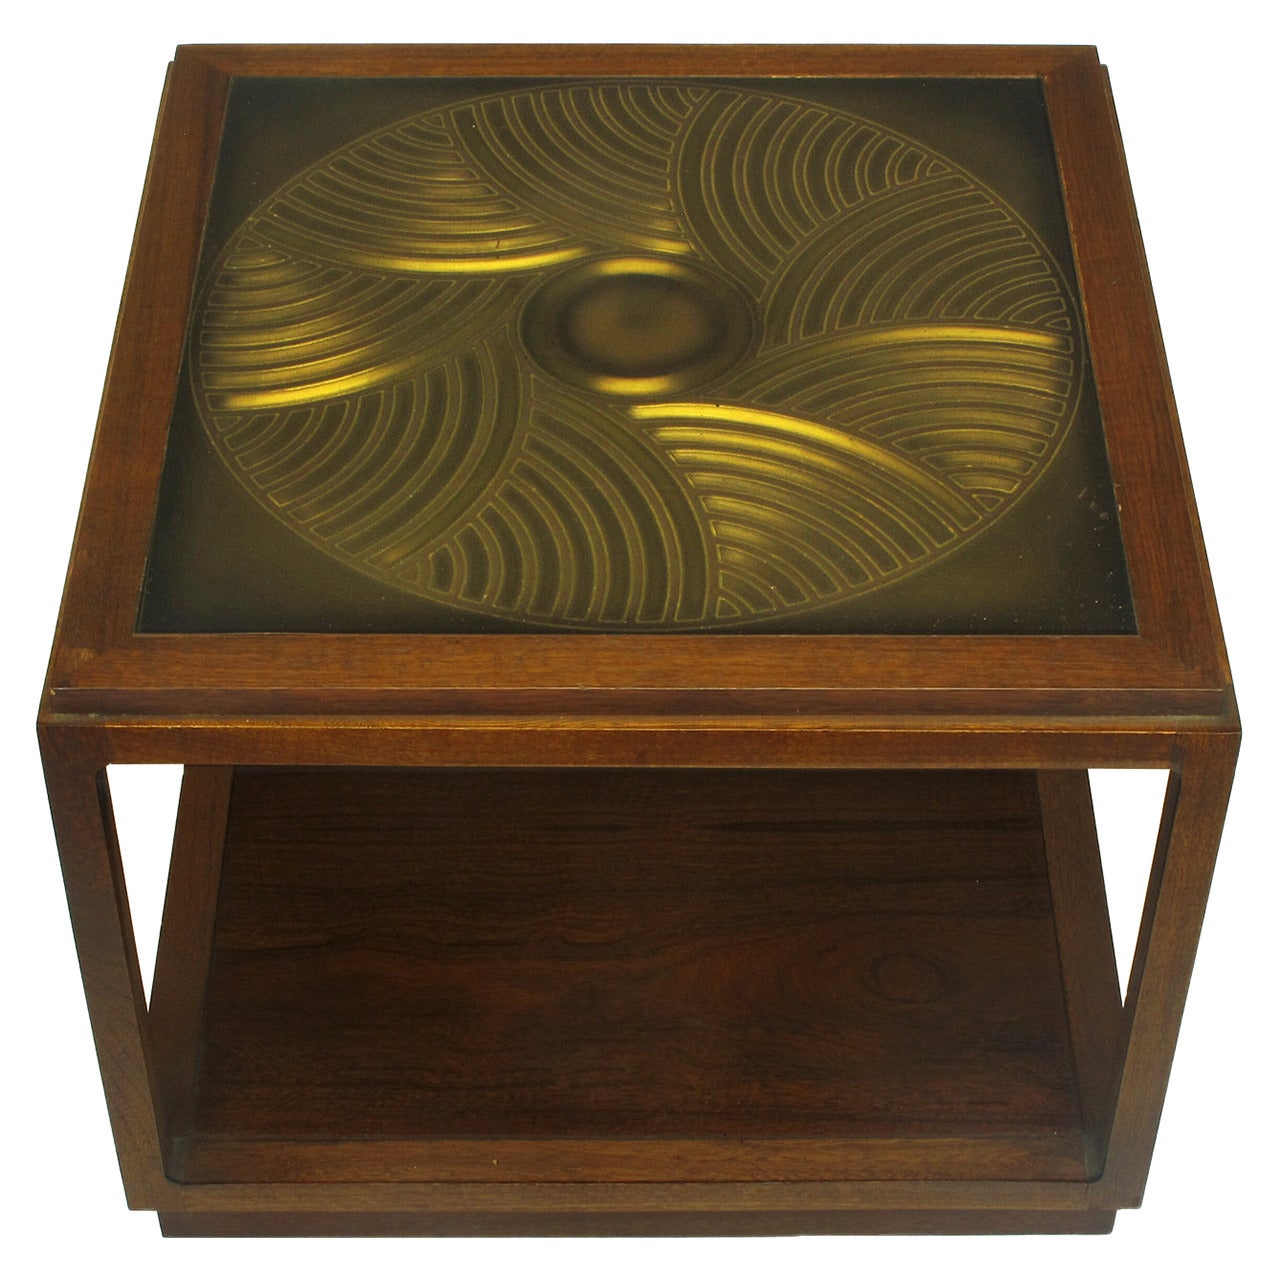 Bert England East Indian Laurel Side Table with Etched Brass Top for Baker